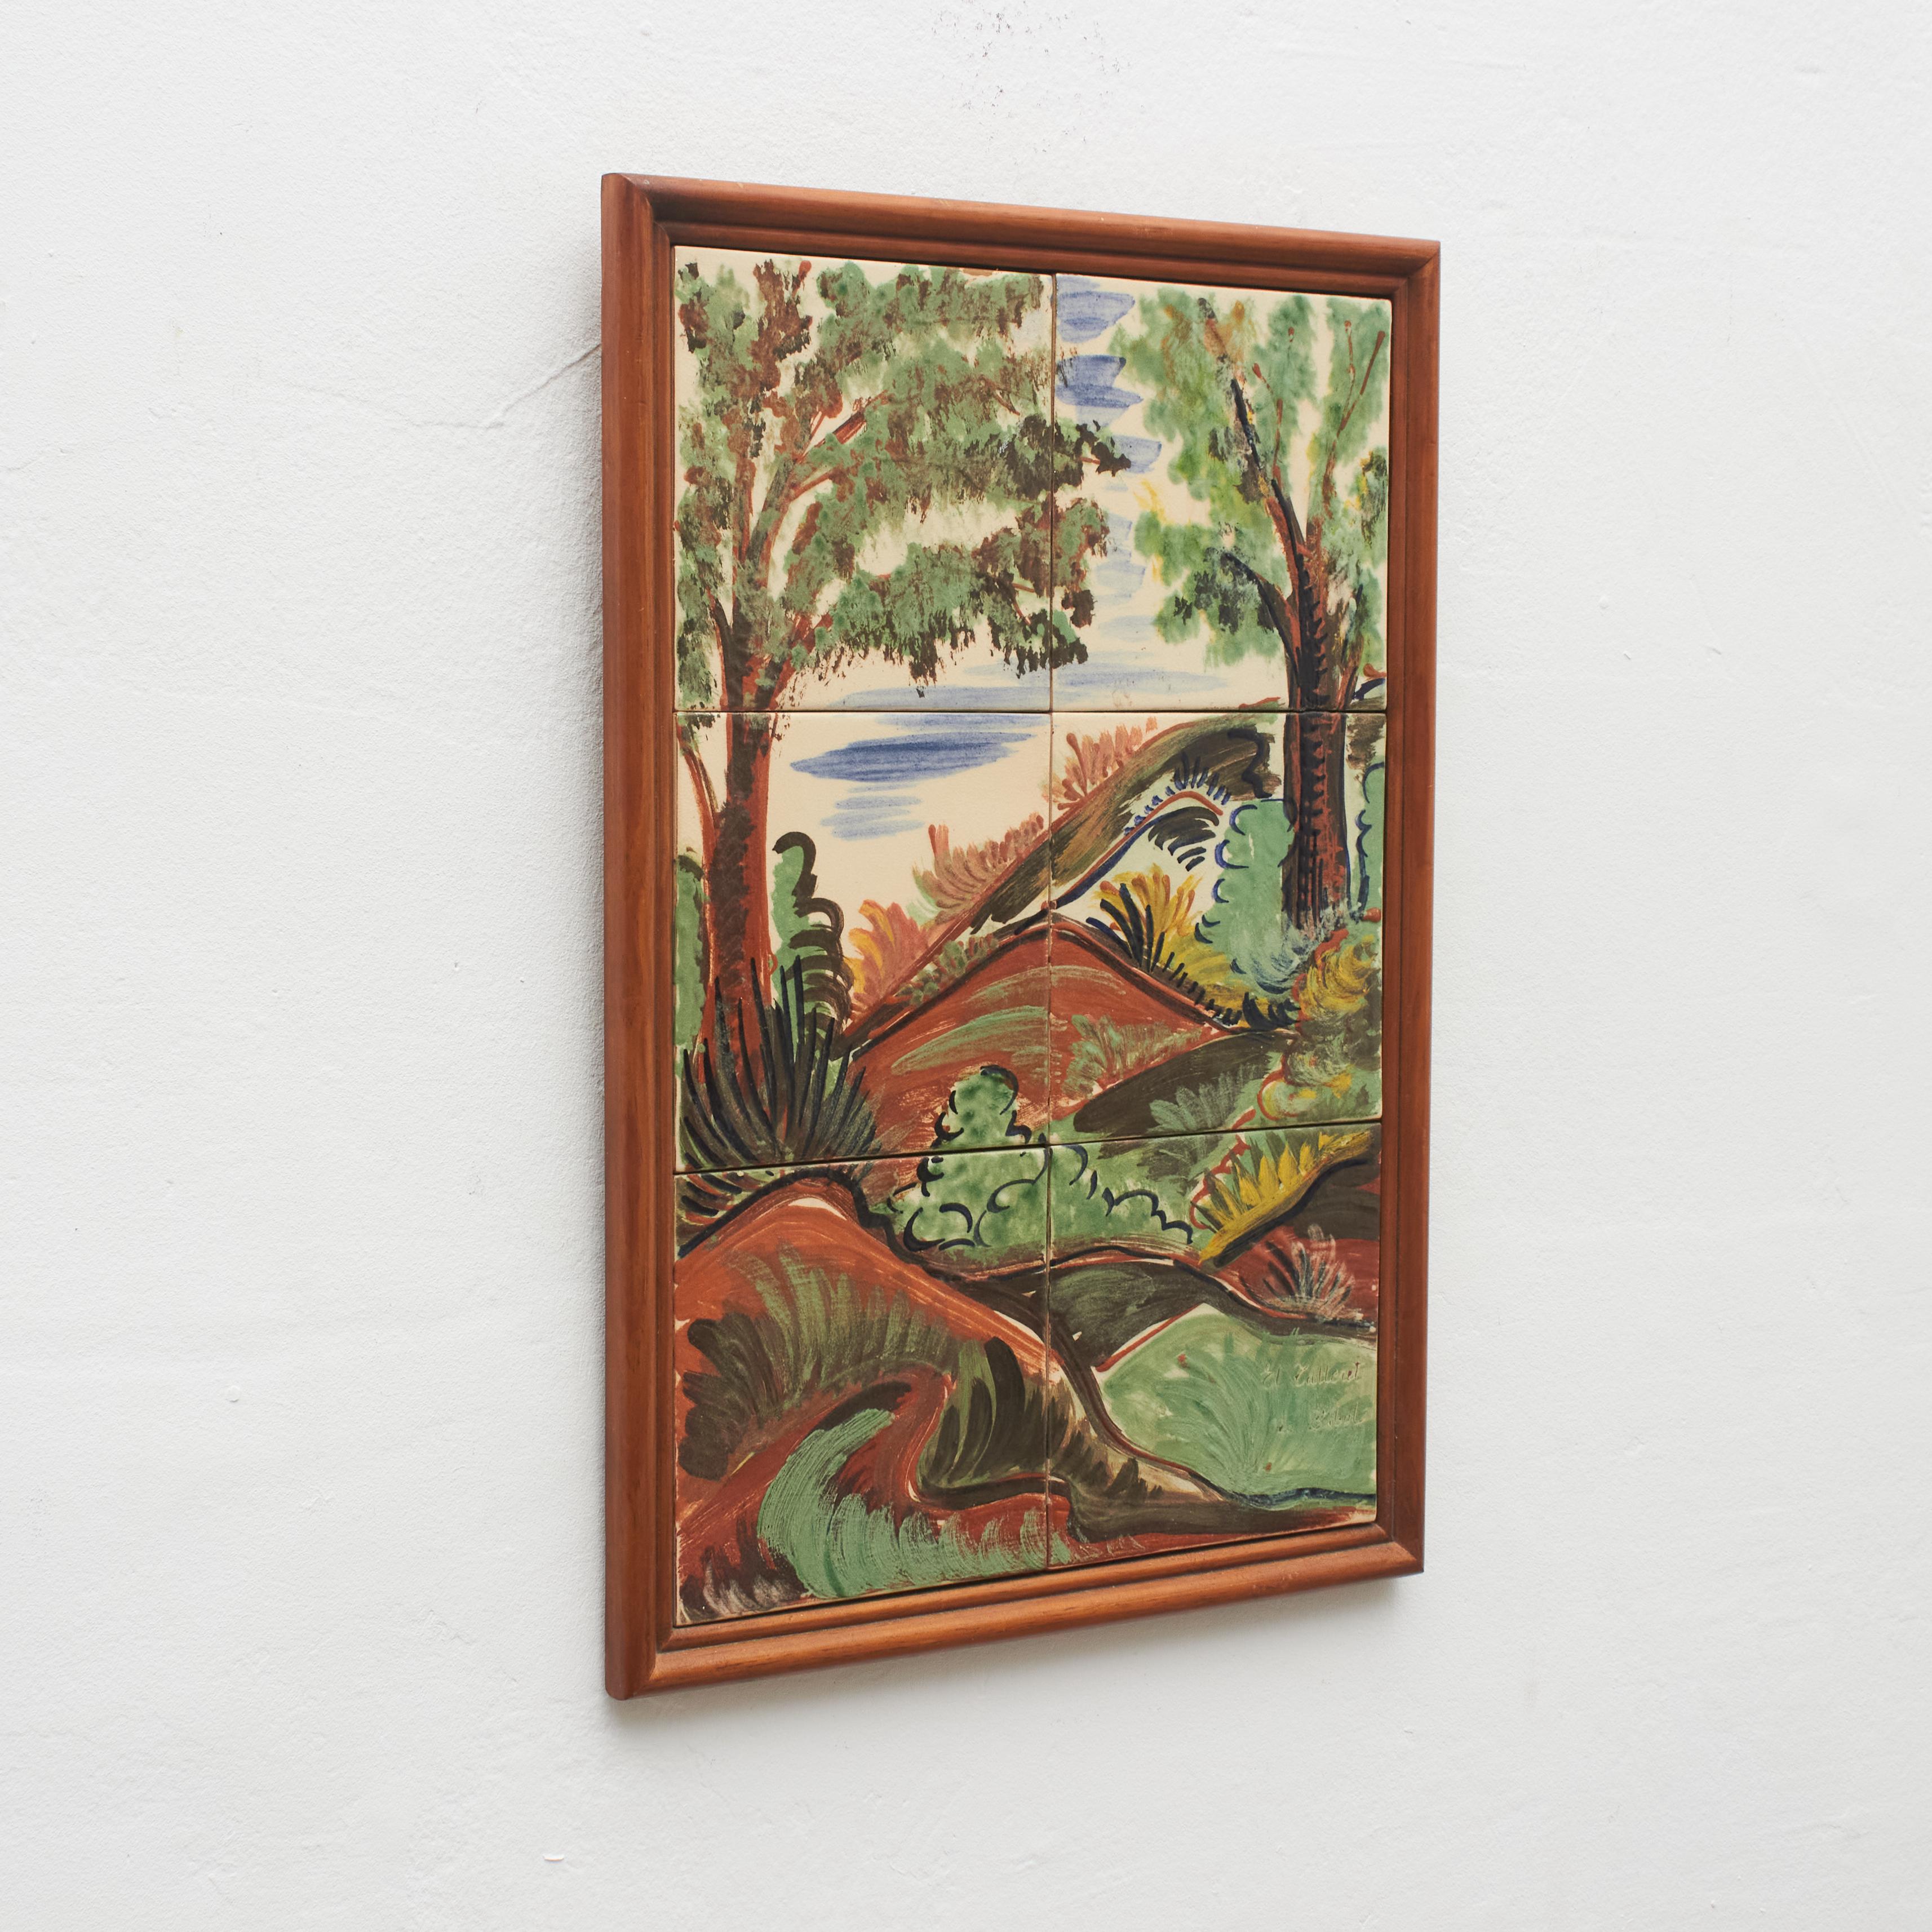 Ceramic hand painted artwork of a colorful landscape by Catalan artist Diaz Costa, circa 1960.
Framed.

In original condition, with minor wear consistent of age and use, preserving a beautiul patina.